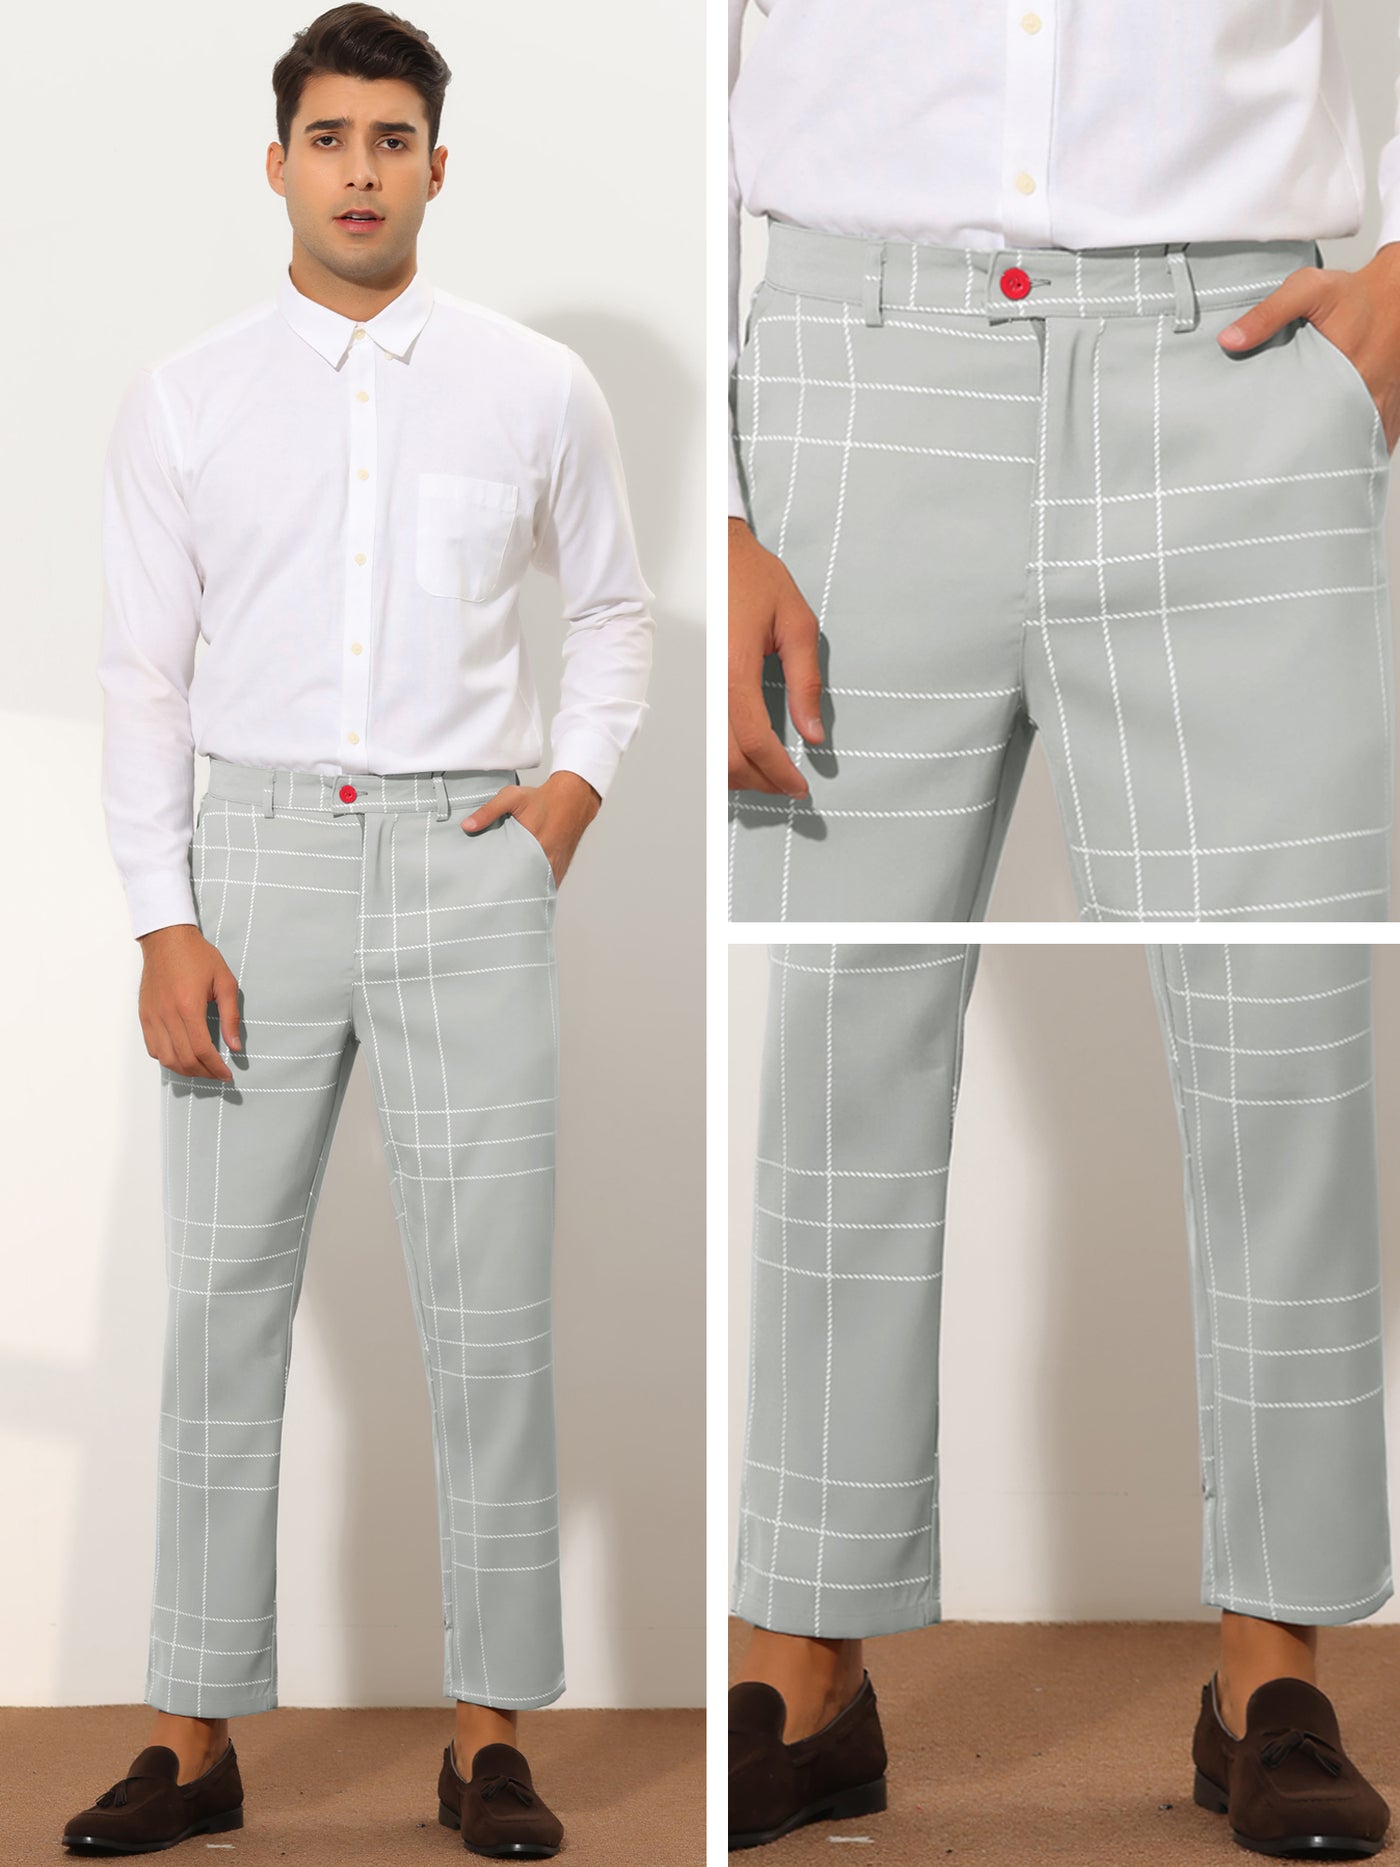 Bublédon Men's Plaid Pants Slim Fit Chino Flat Front Business Checked Trousers